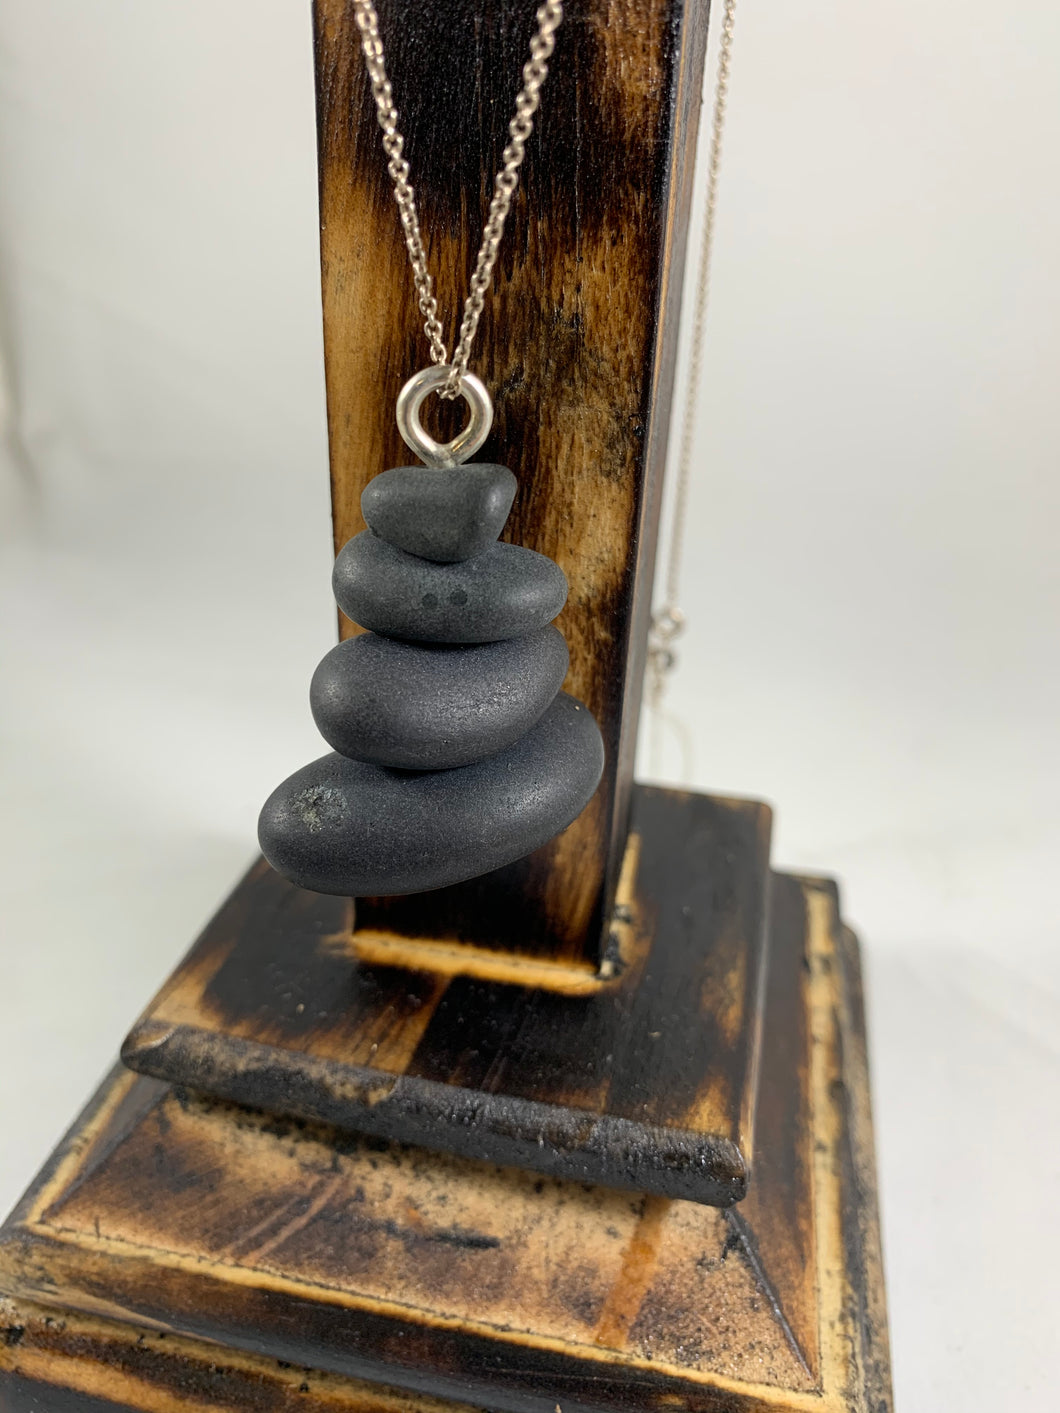 River rocks Cairn. With silver and a sterling silver chain